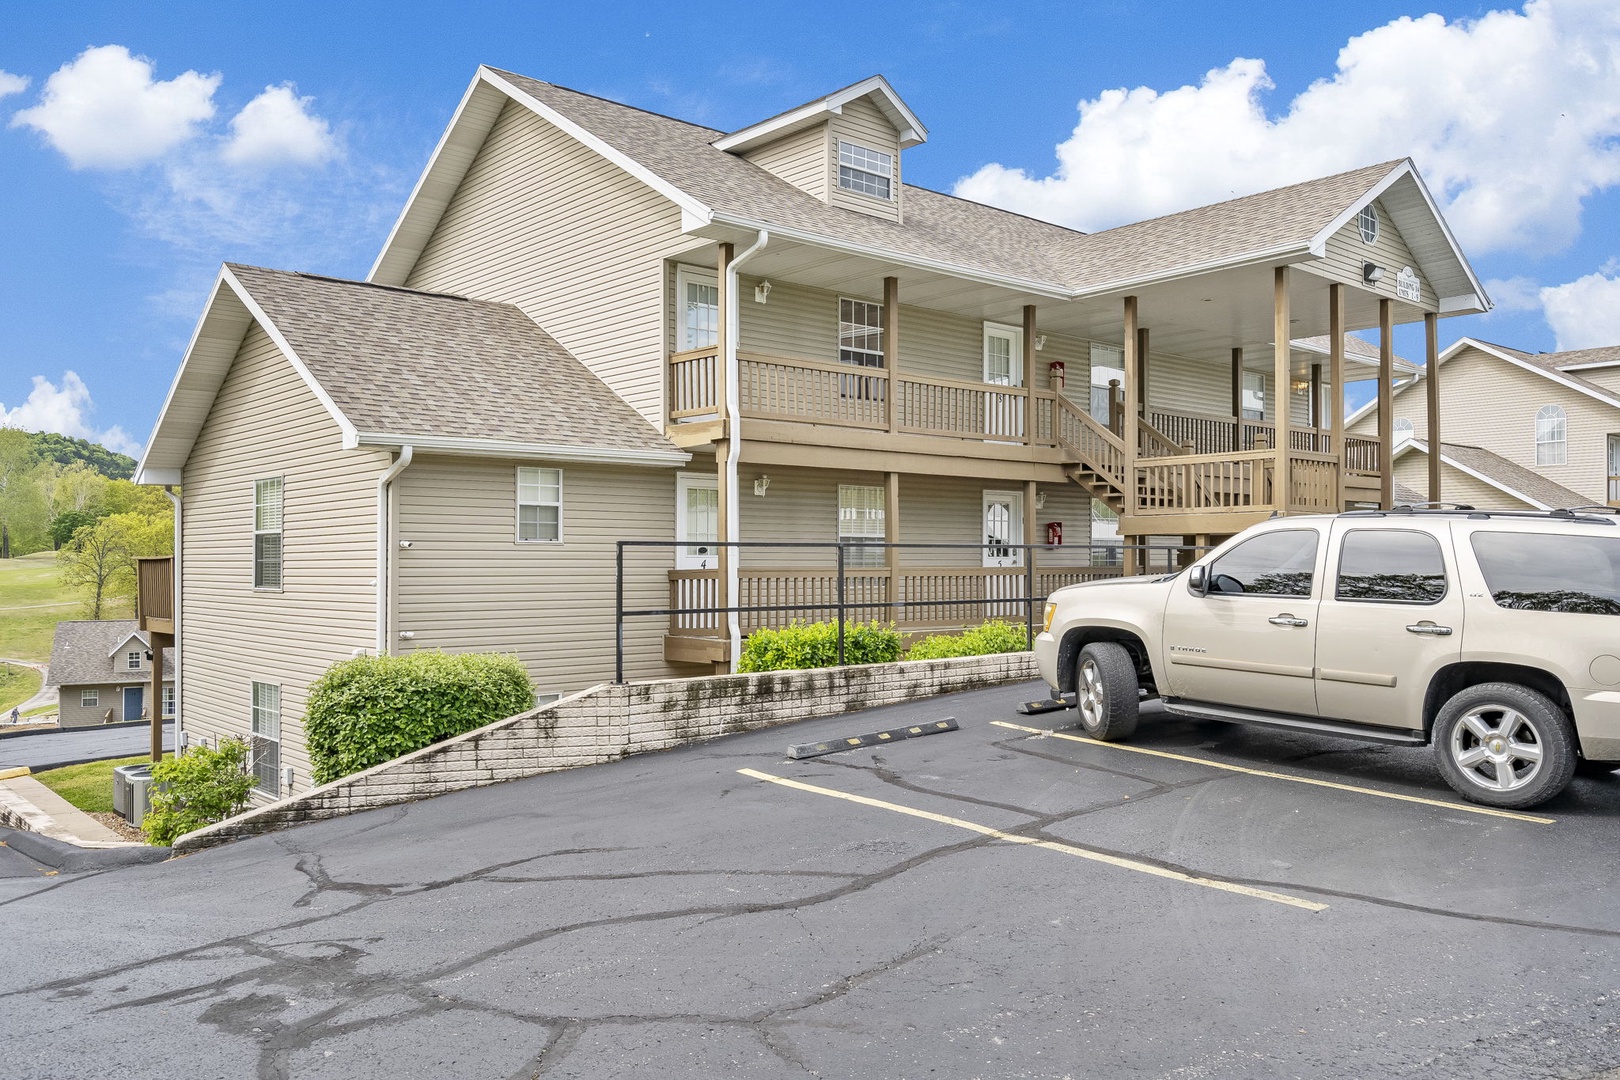 This condo offers Parking for 2 Vehicles in the Parking Lot, first come first serve